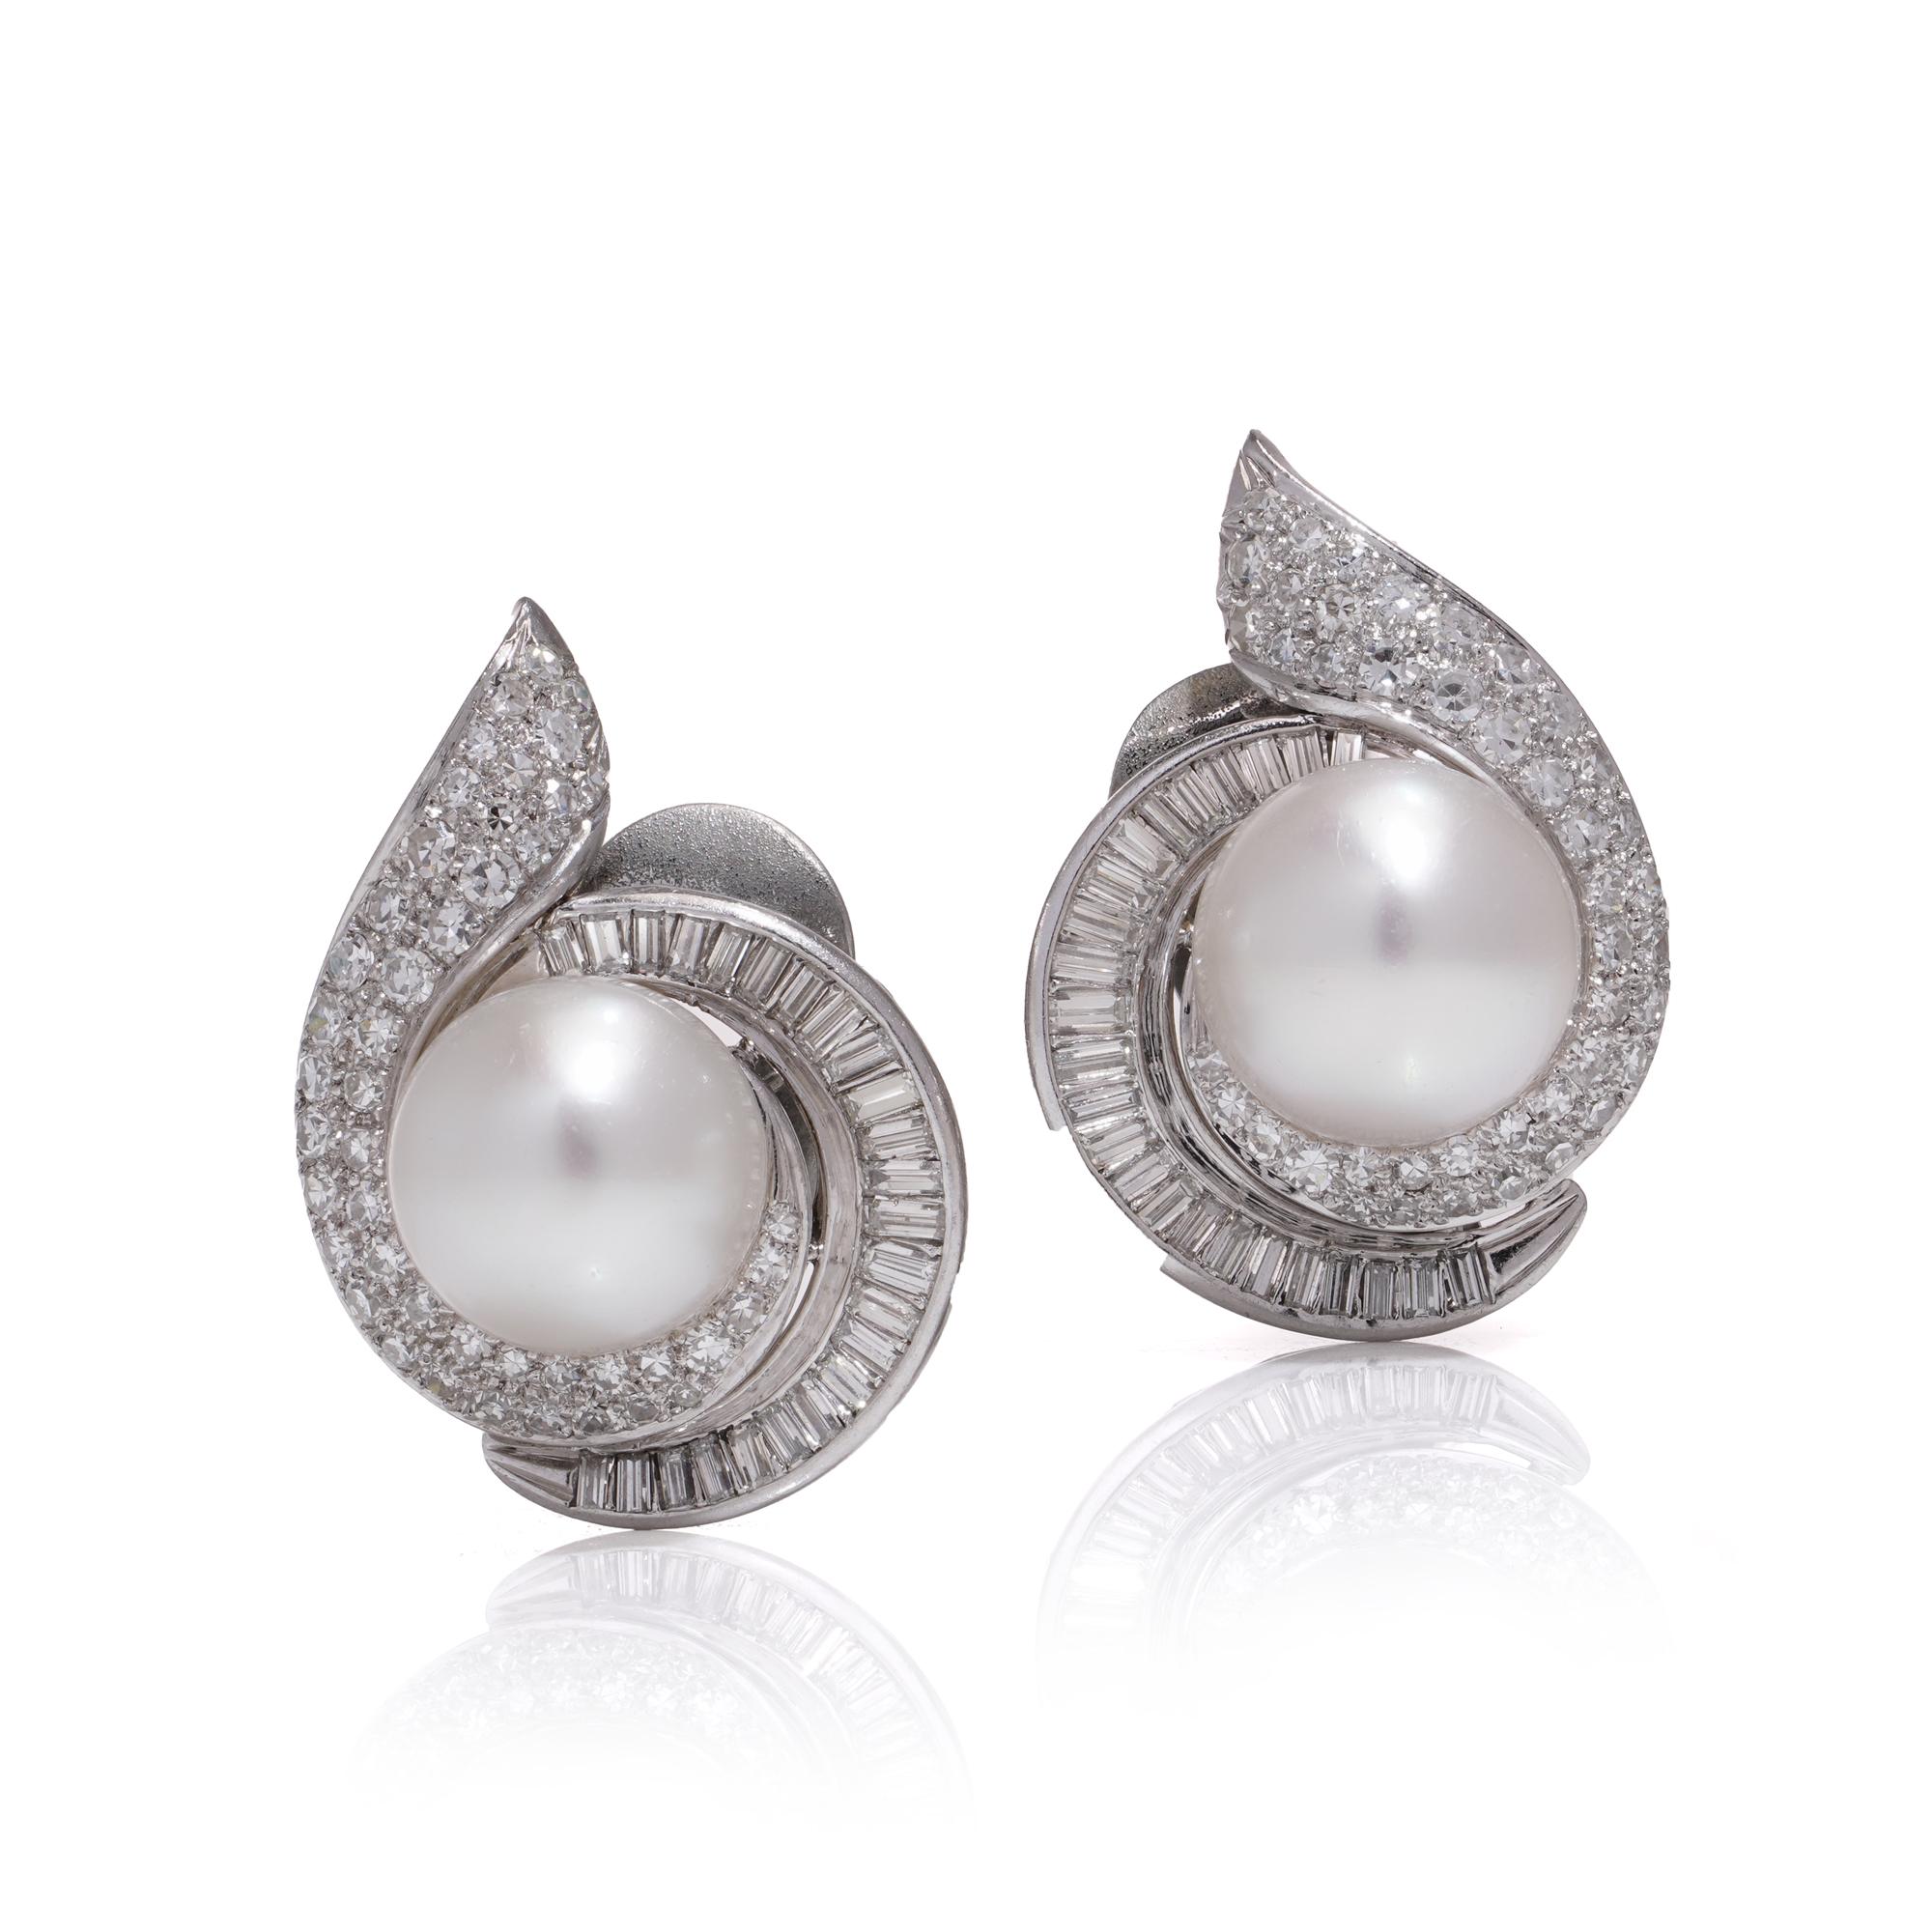 Vintage platinum earrings featuring a pair of cultured South Sea pearl diamond cluster clip-on. The earrings are hallmarked with a 